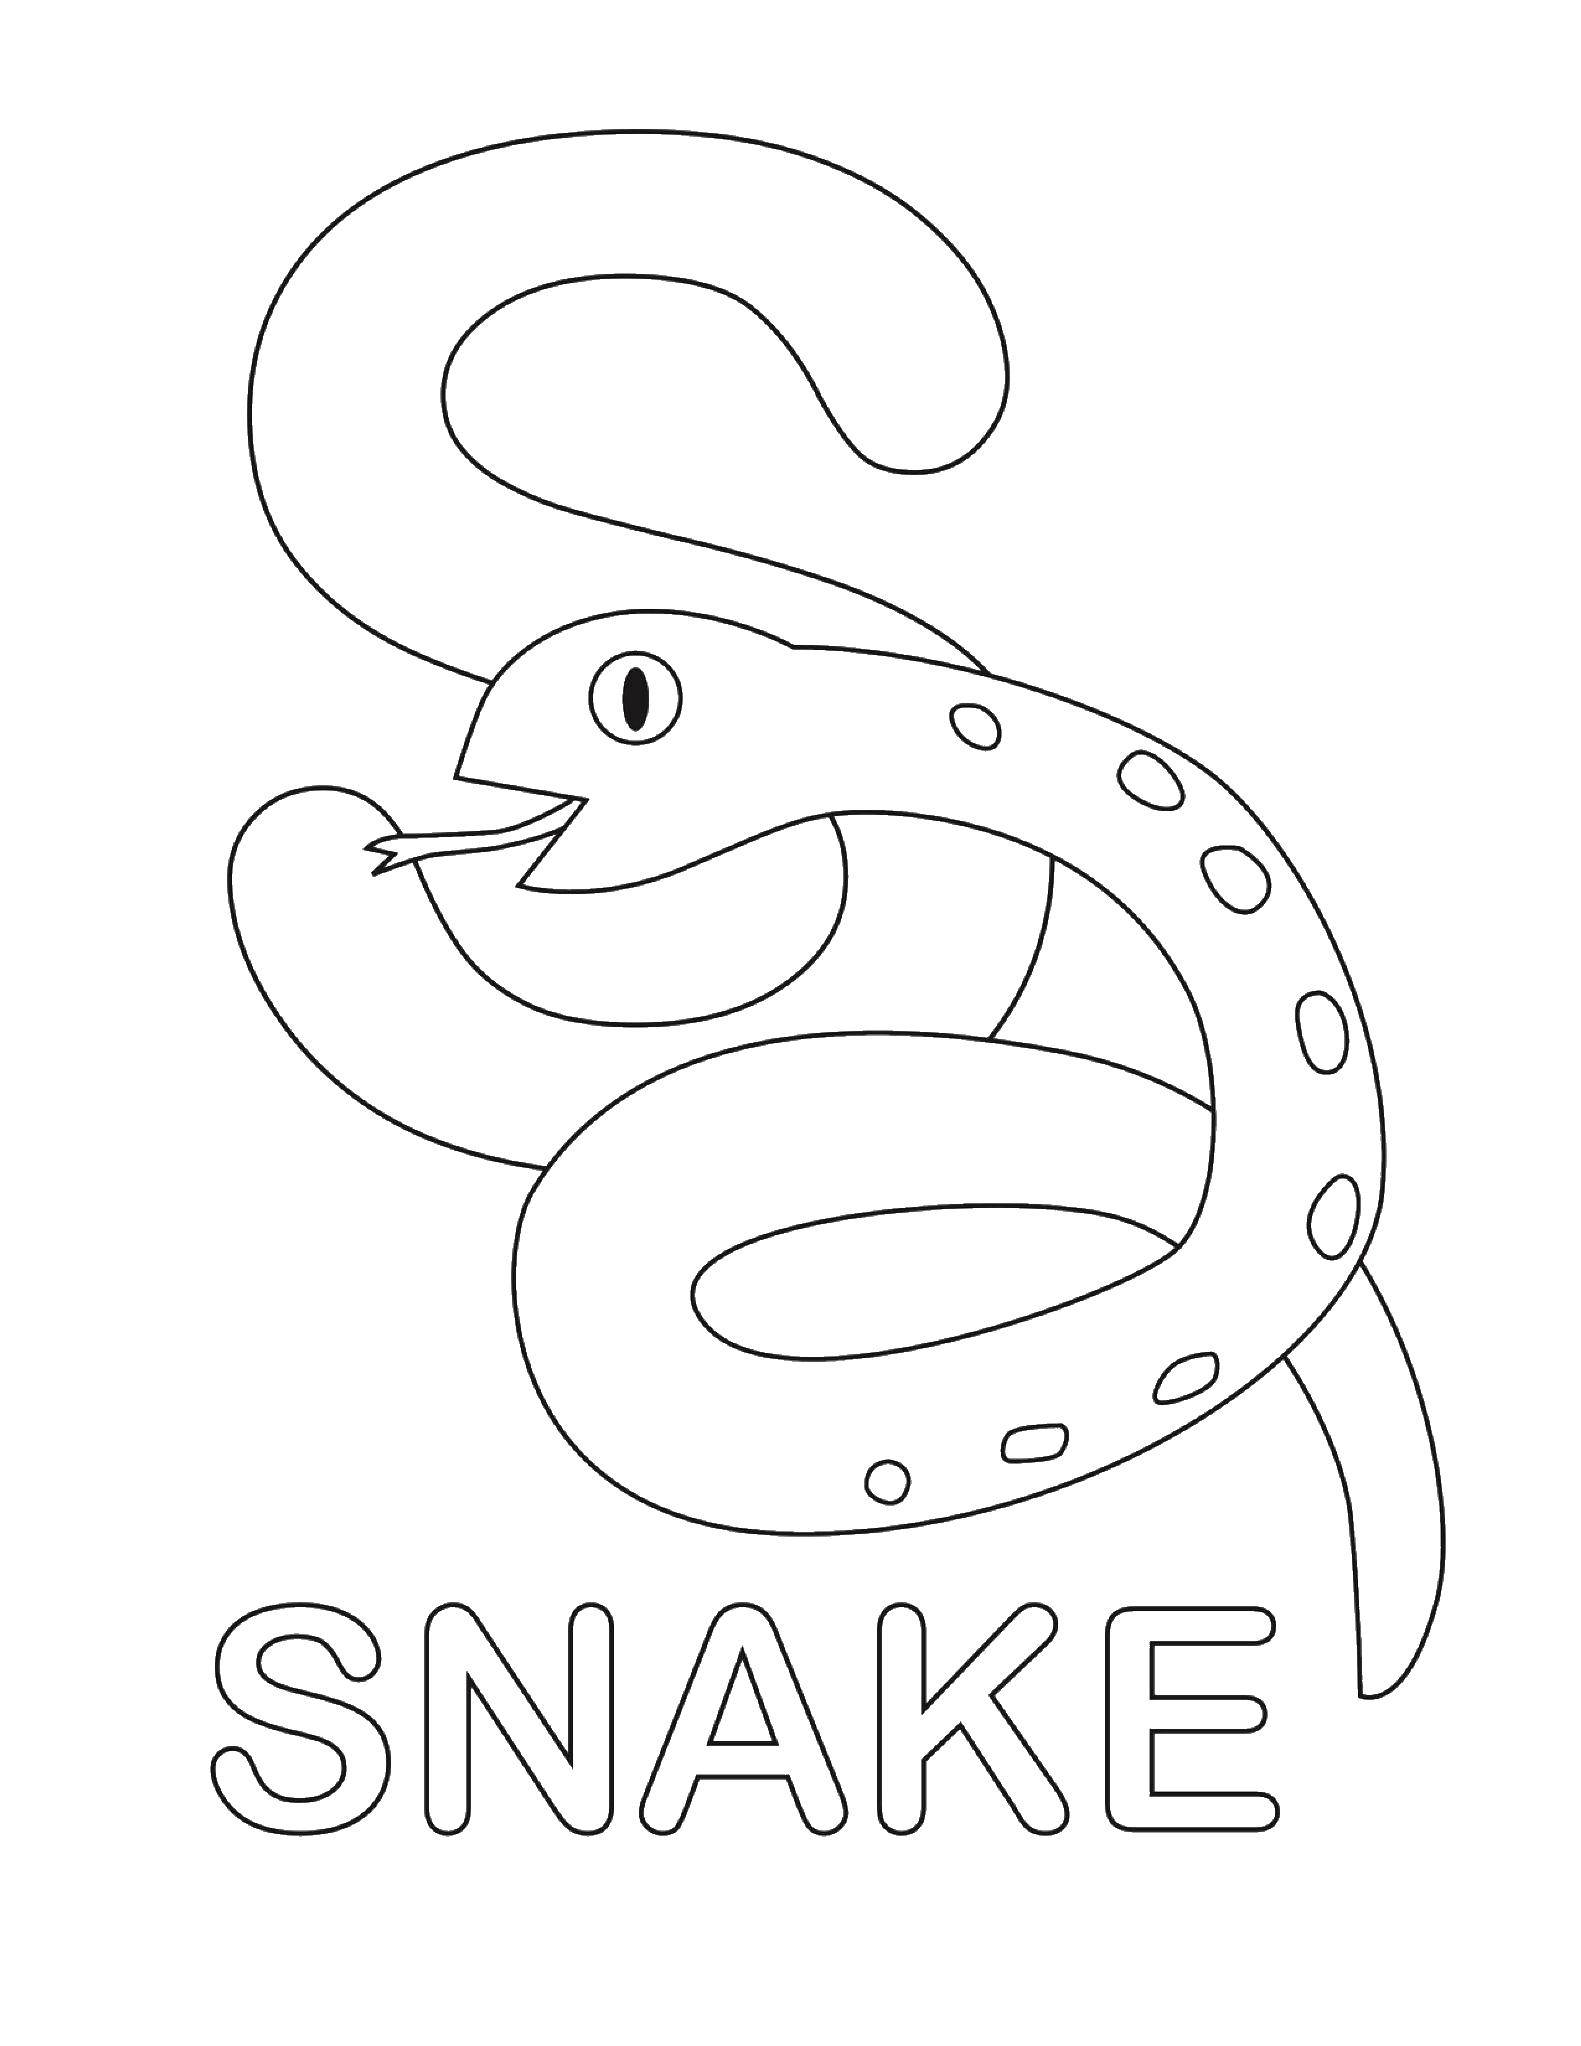 Coloring Snake. Category English words. Tags:  the English word snake.